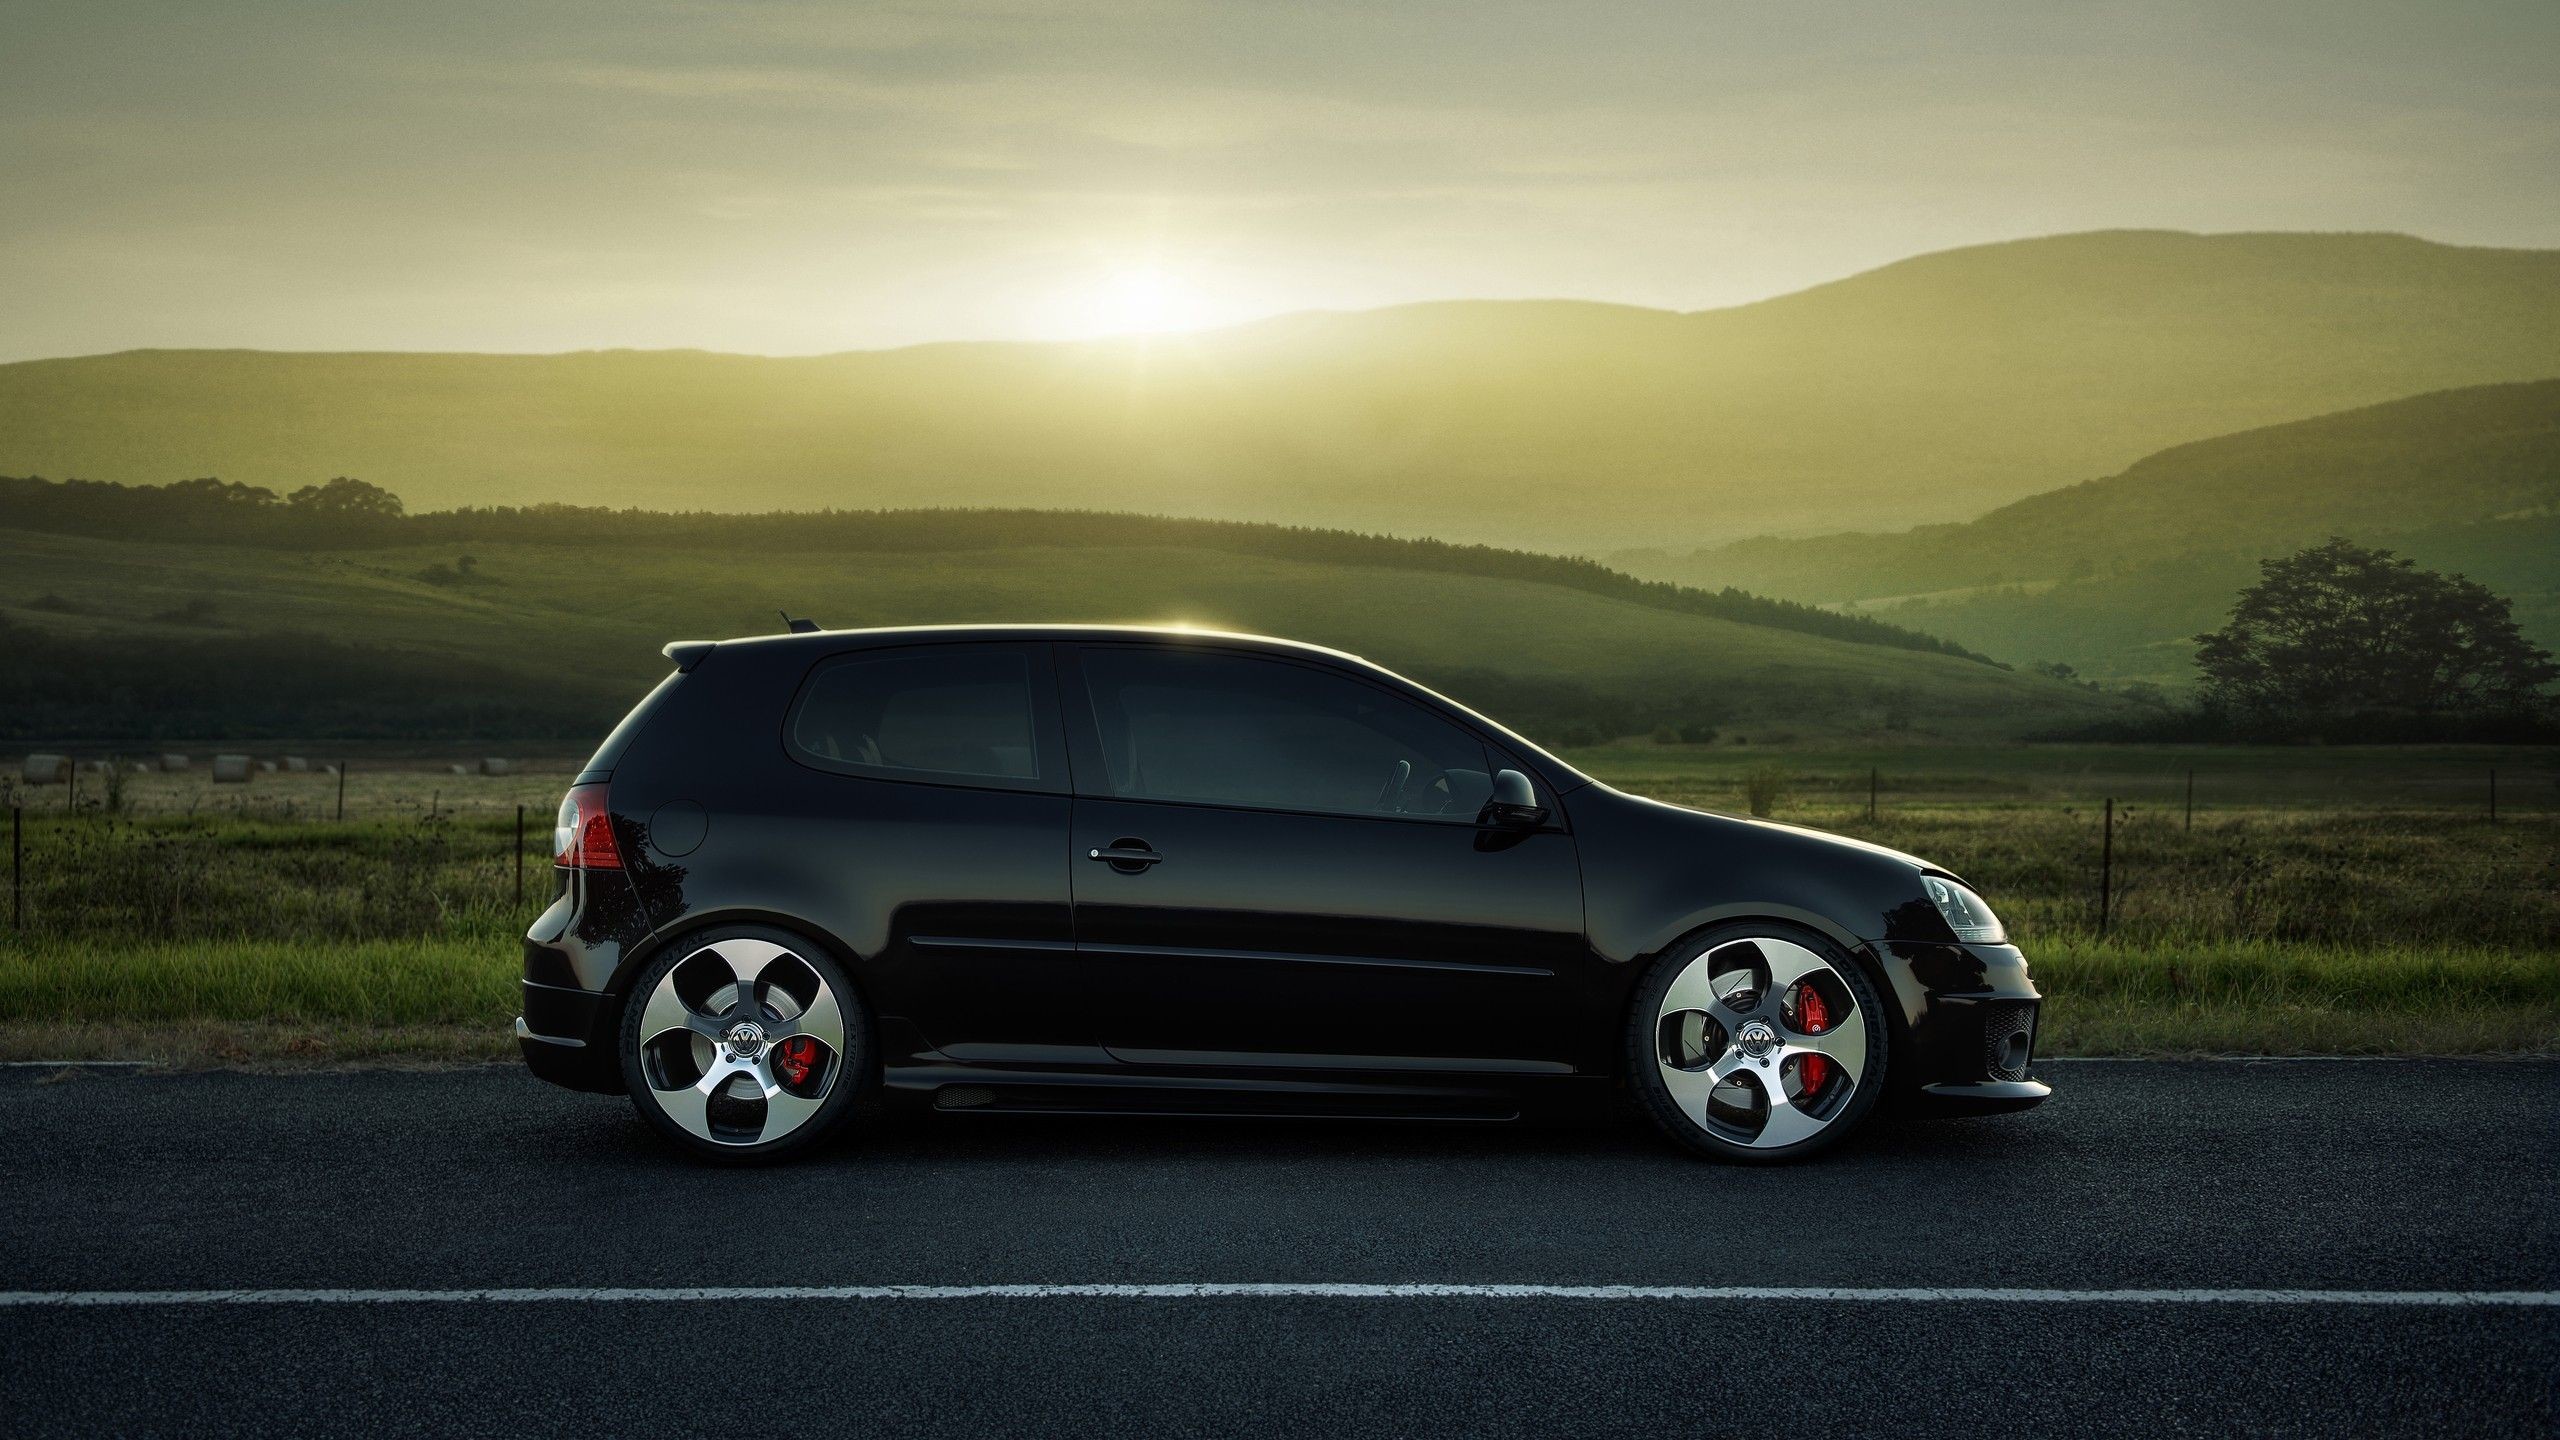 2560x1440 VW Golf 6 GTI Wallpaper Volkswagen Cars Wallpapers) – Wallpapers and  Backgrounds